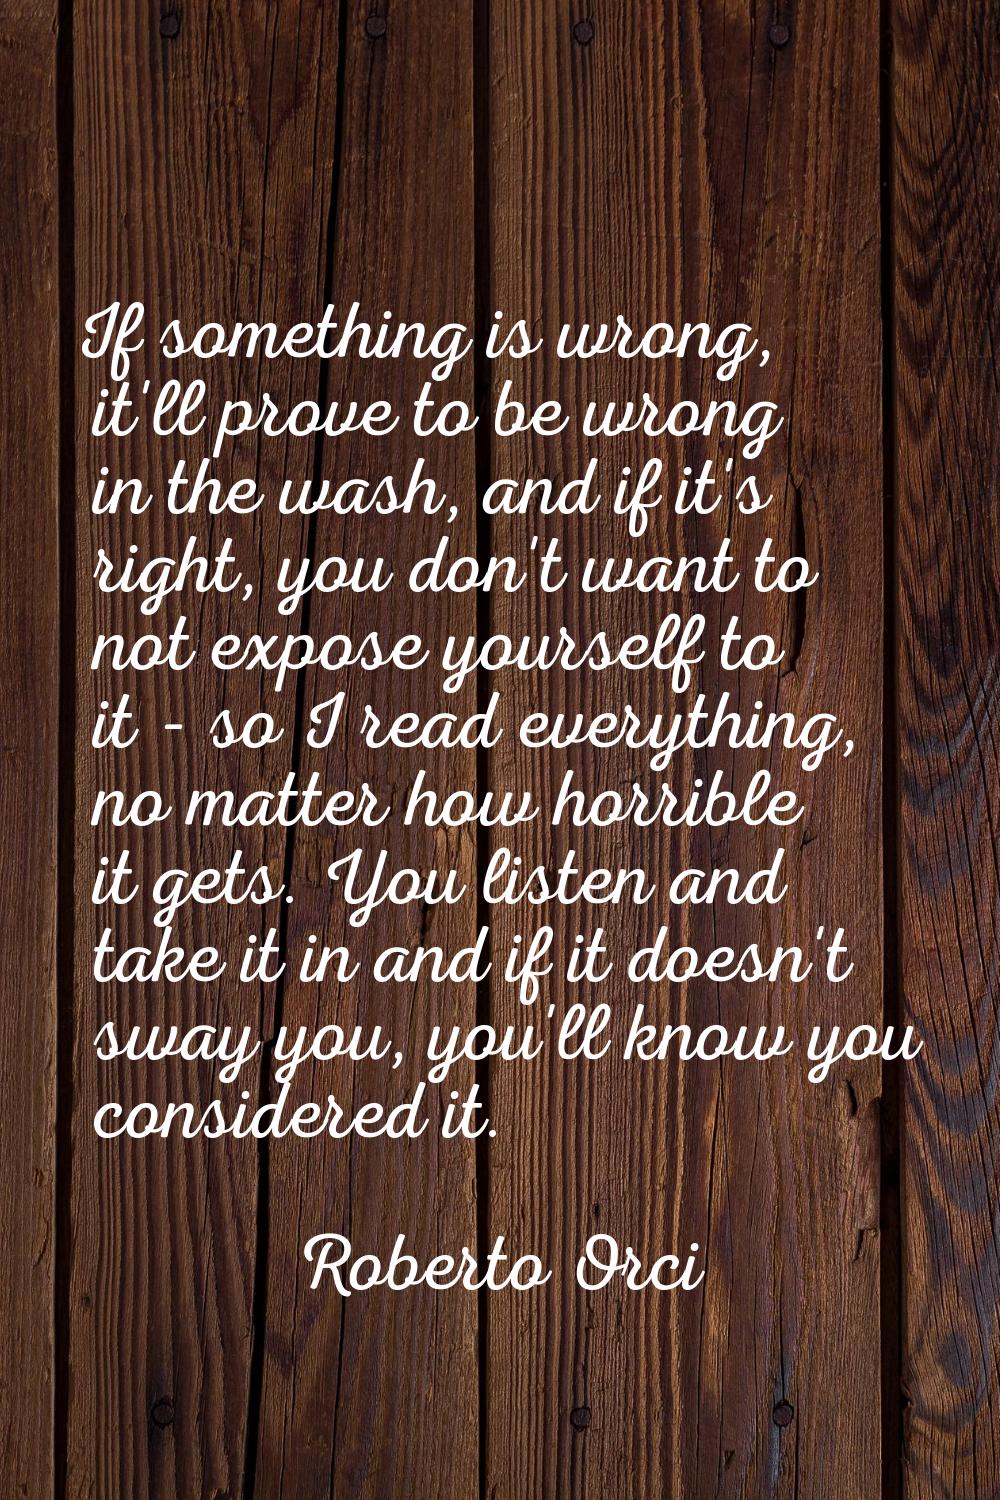 If something is wrong, it'll prove to be wrong in the wash, and if it's right, you don't want to no